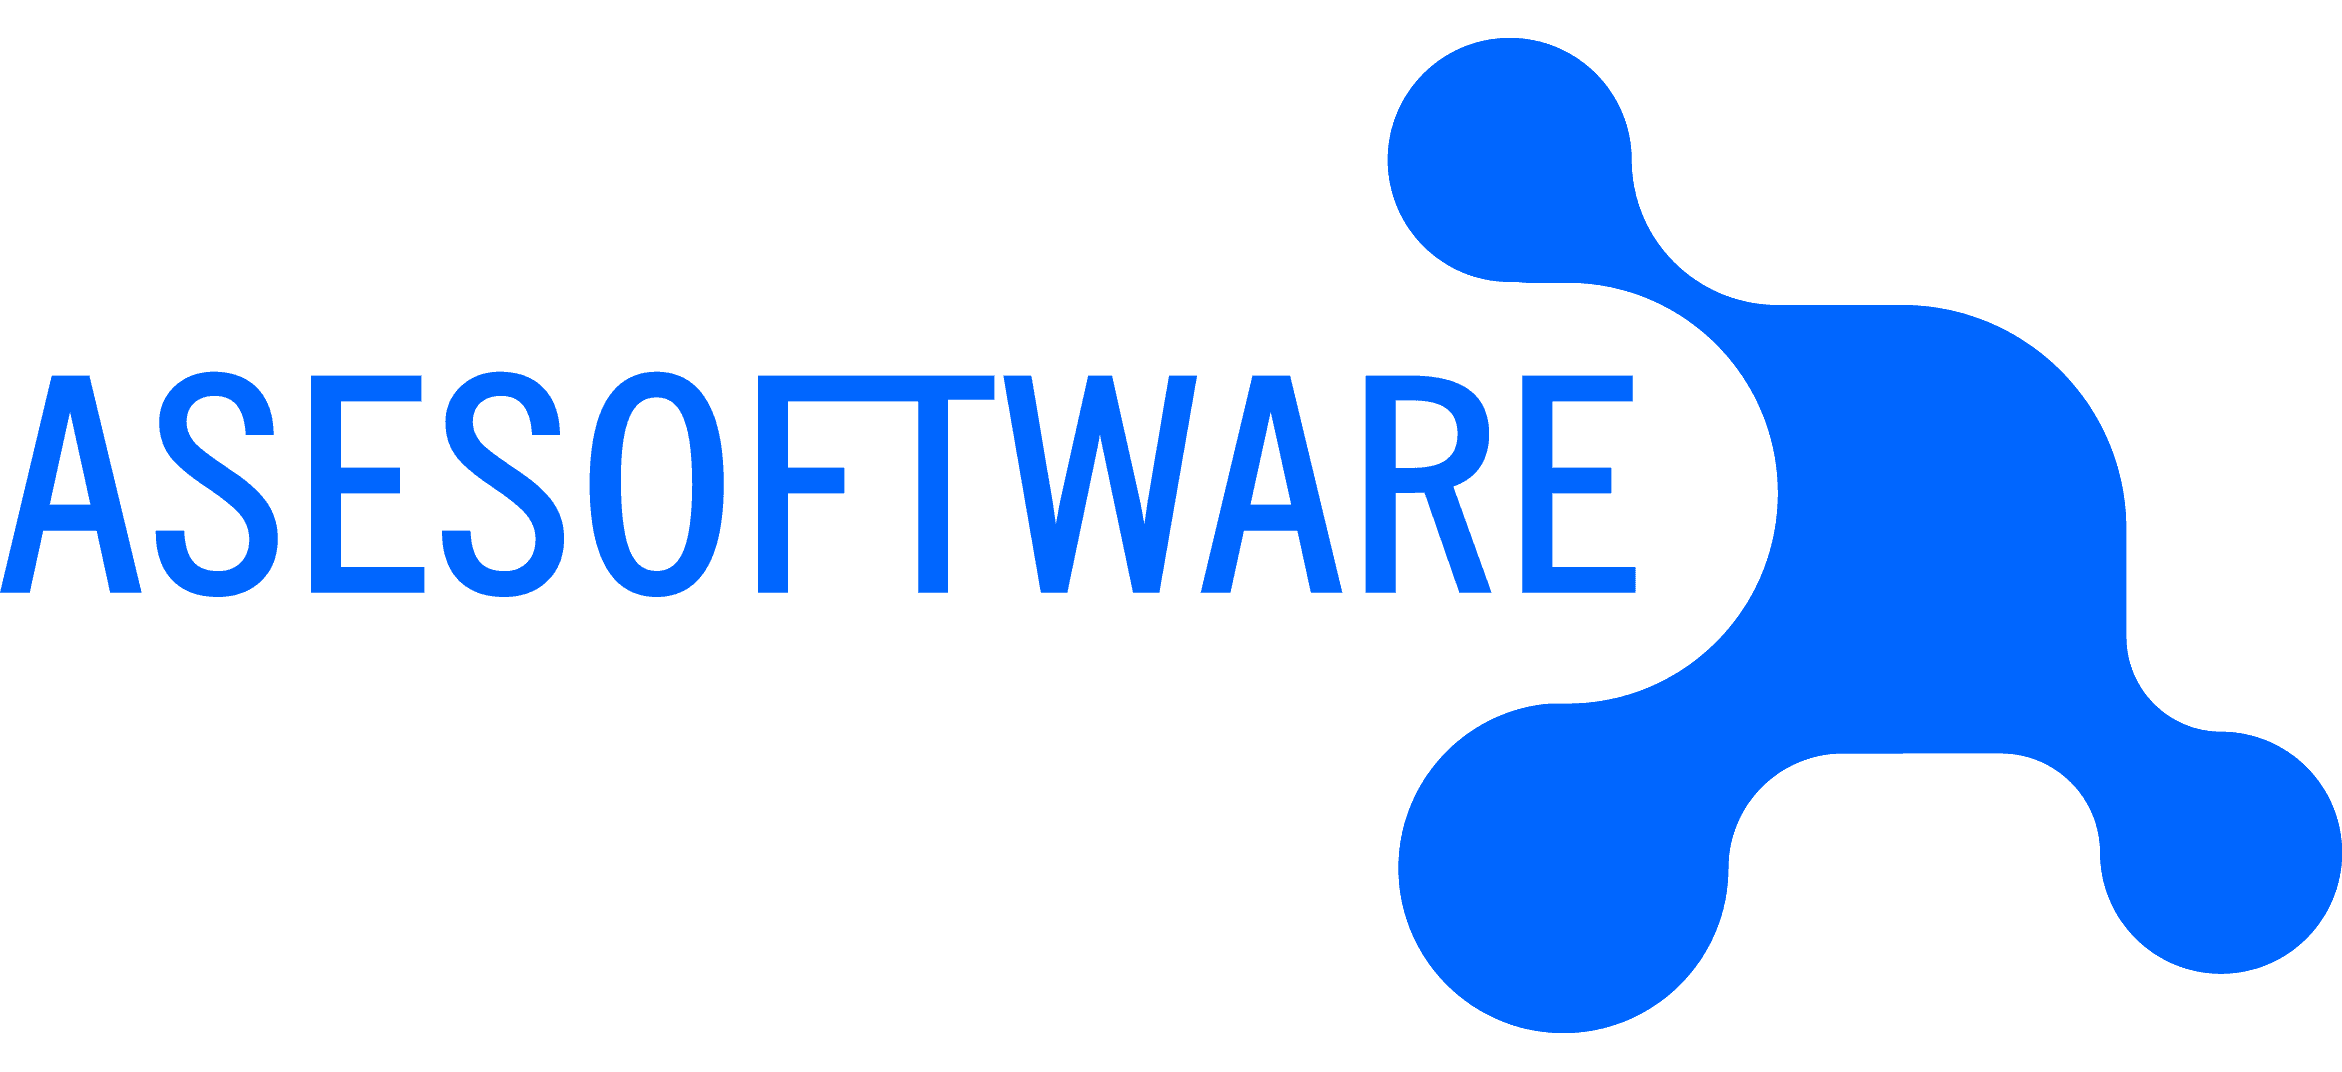 ASESOFTWARE S.A.S.